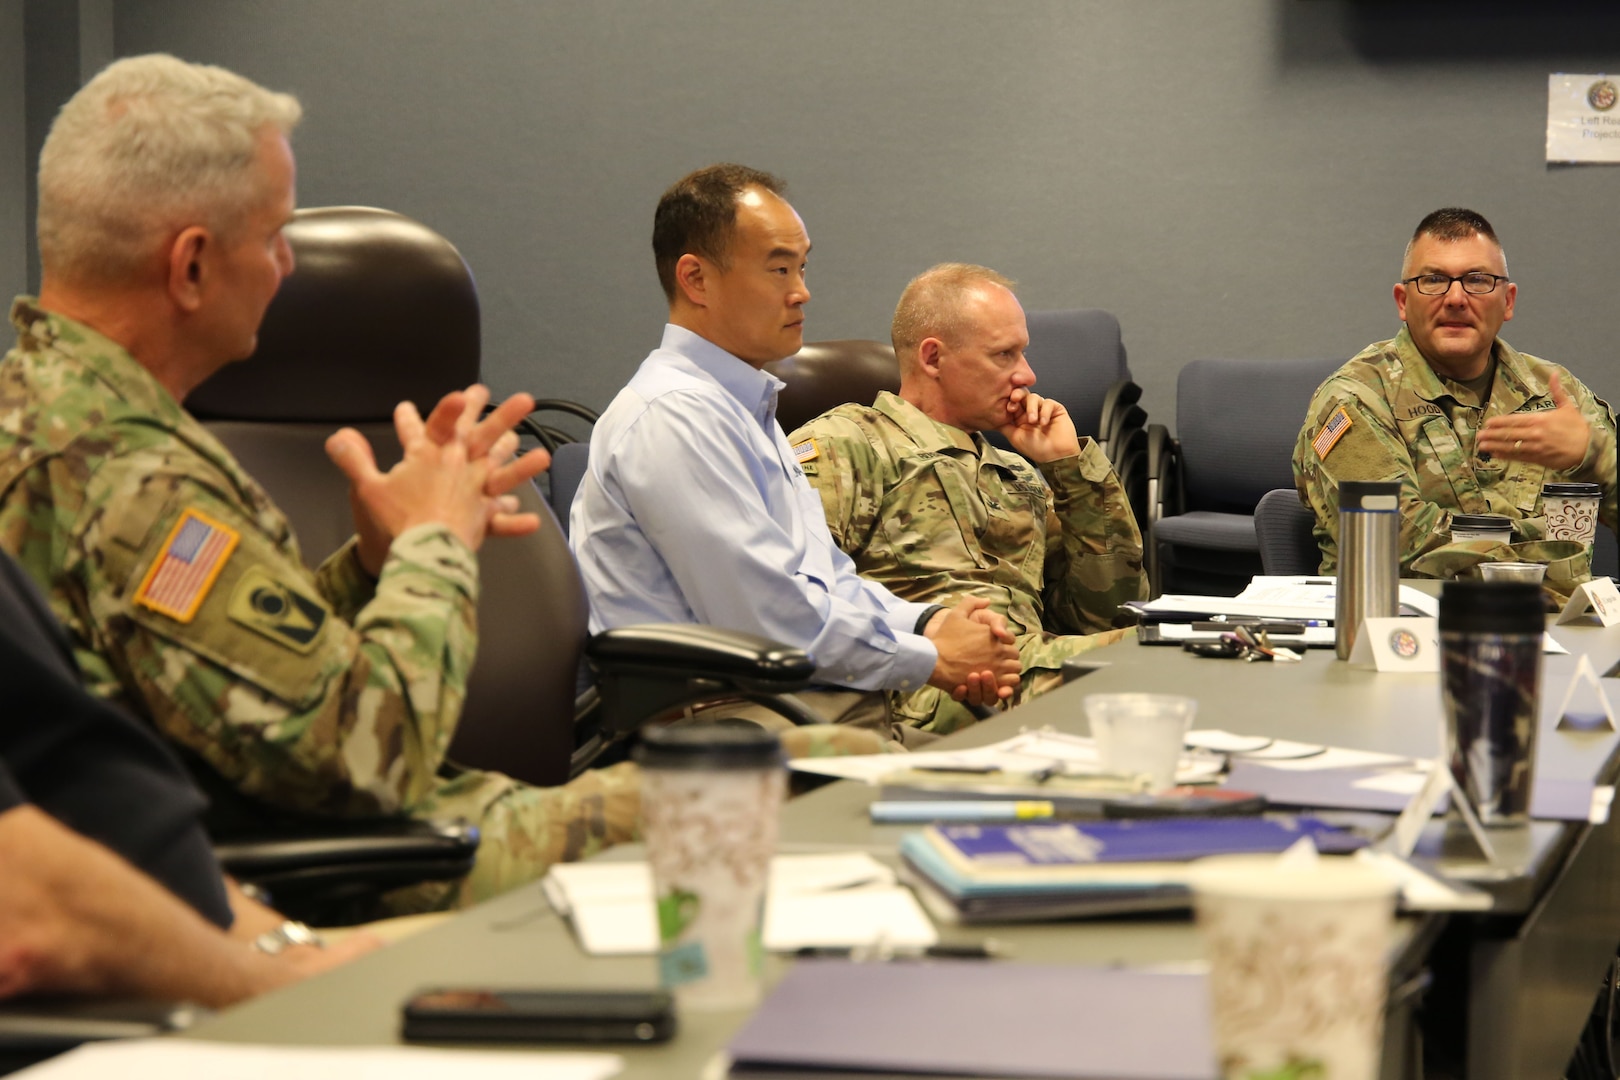 Army Maj. Gen. Richard Gallant, left, discusses response scenarios with attendees at the Joint Task Force Civil Support (JTF-CS) table top exercise May 15-16. More than 50 people from the Chemical, Biological, Radiological and Nuclear (CBRN) Response Enterprise (CRE) gathered here to rehearse responding to complex catastrophic disasters in the United States and its territories. JTF-CS provides command and control for designated Department of Defense specialized response forces to assist local, state, federal and tribal partners in saving lives, preventing further injury, and providing critical support to enable community recovery.  (Official Department of Defense photo by Mass Communication Specialist 3rd Class Michael Redd)